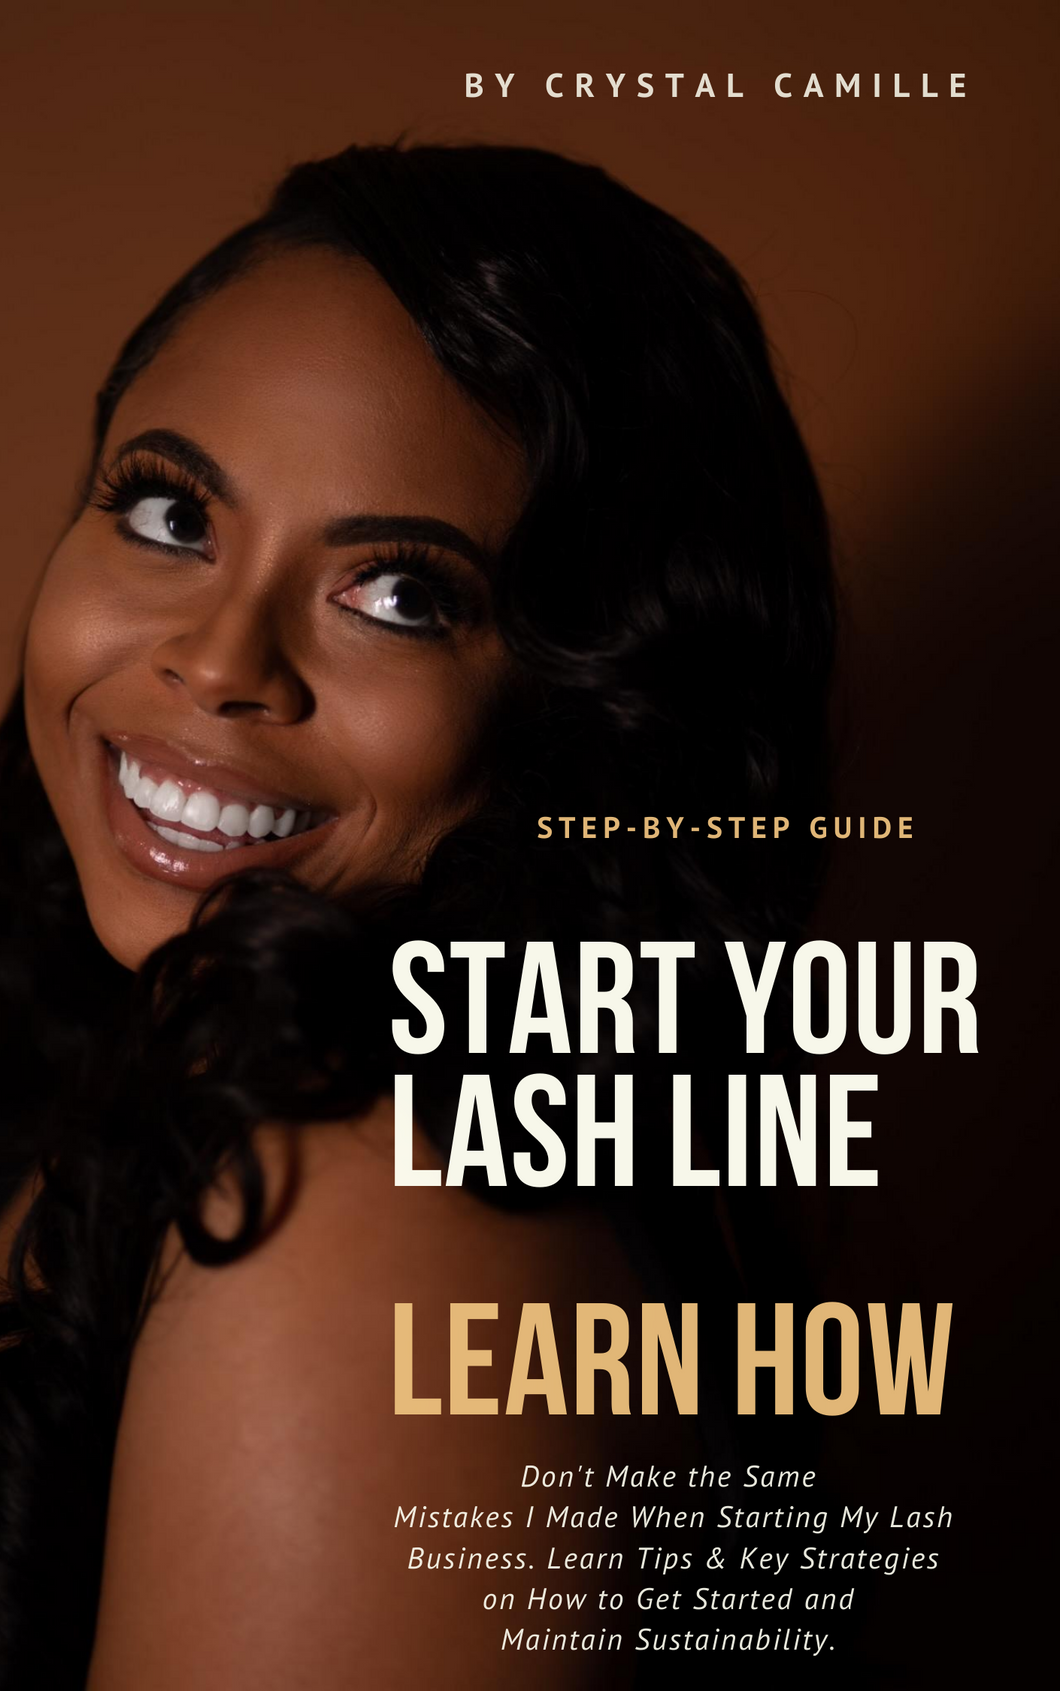 How to Start Your Lash Line eBook